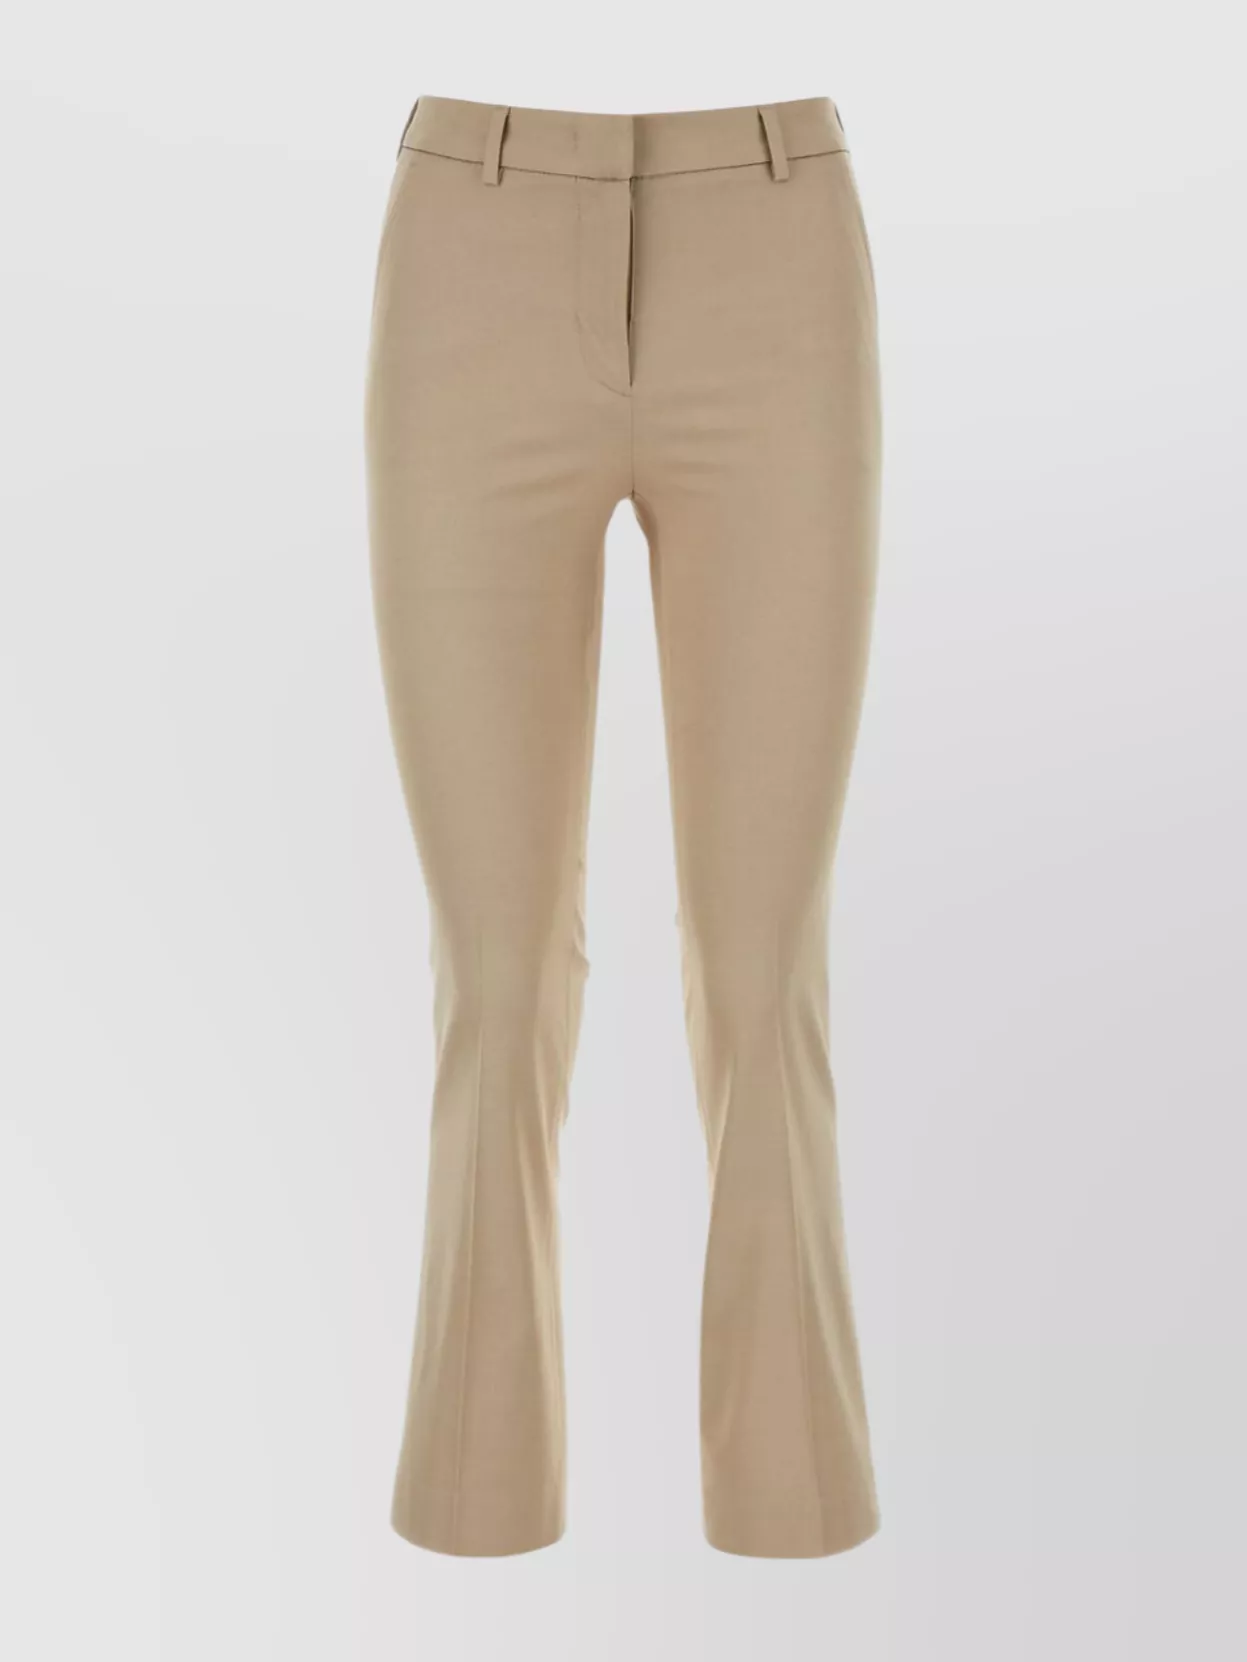 Pt Torino Trousers Flared Silhouette Belt Loops In Neutral